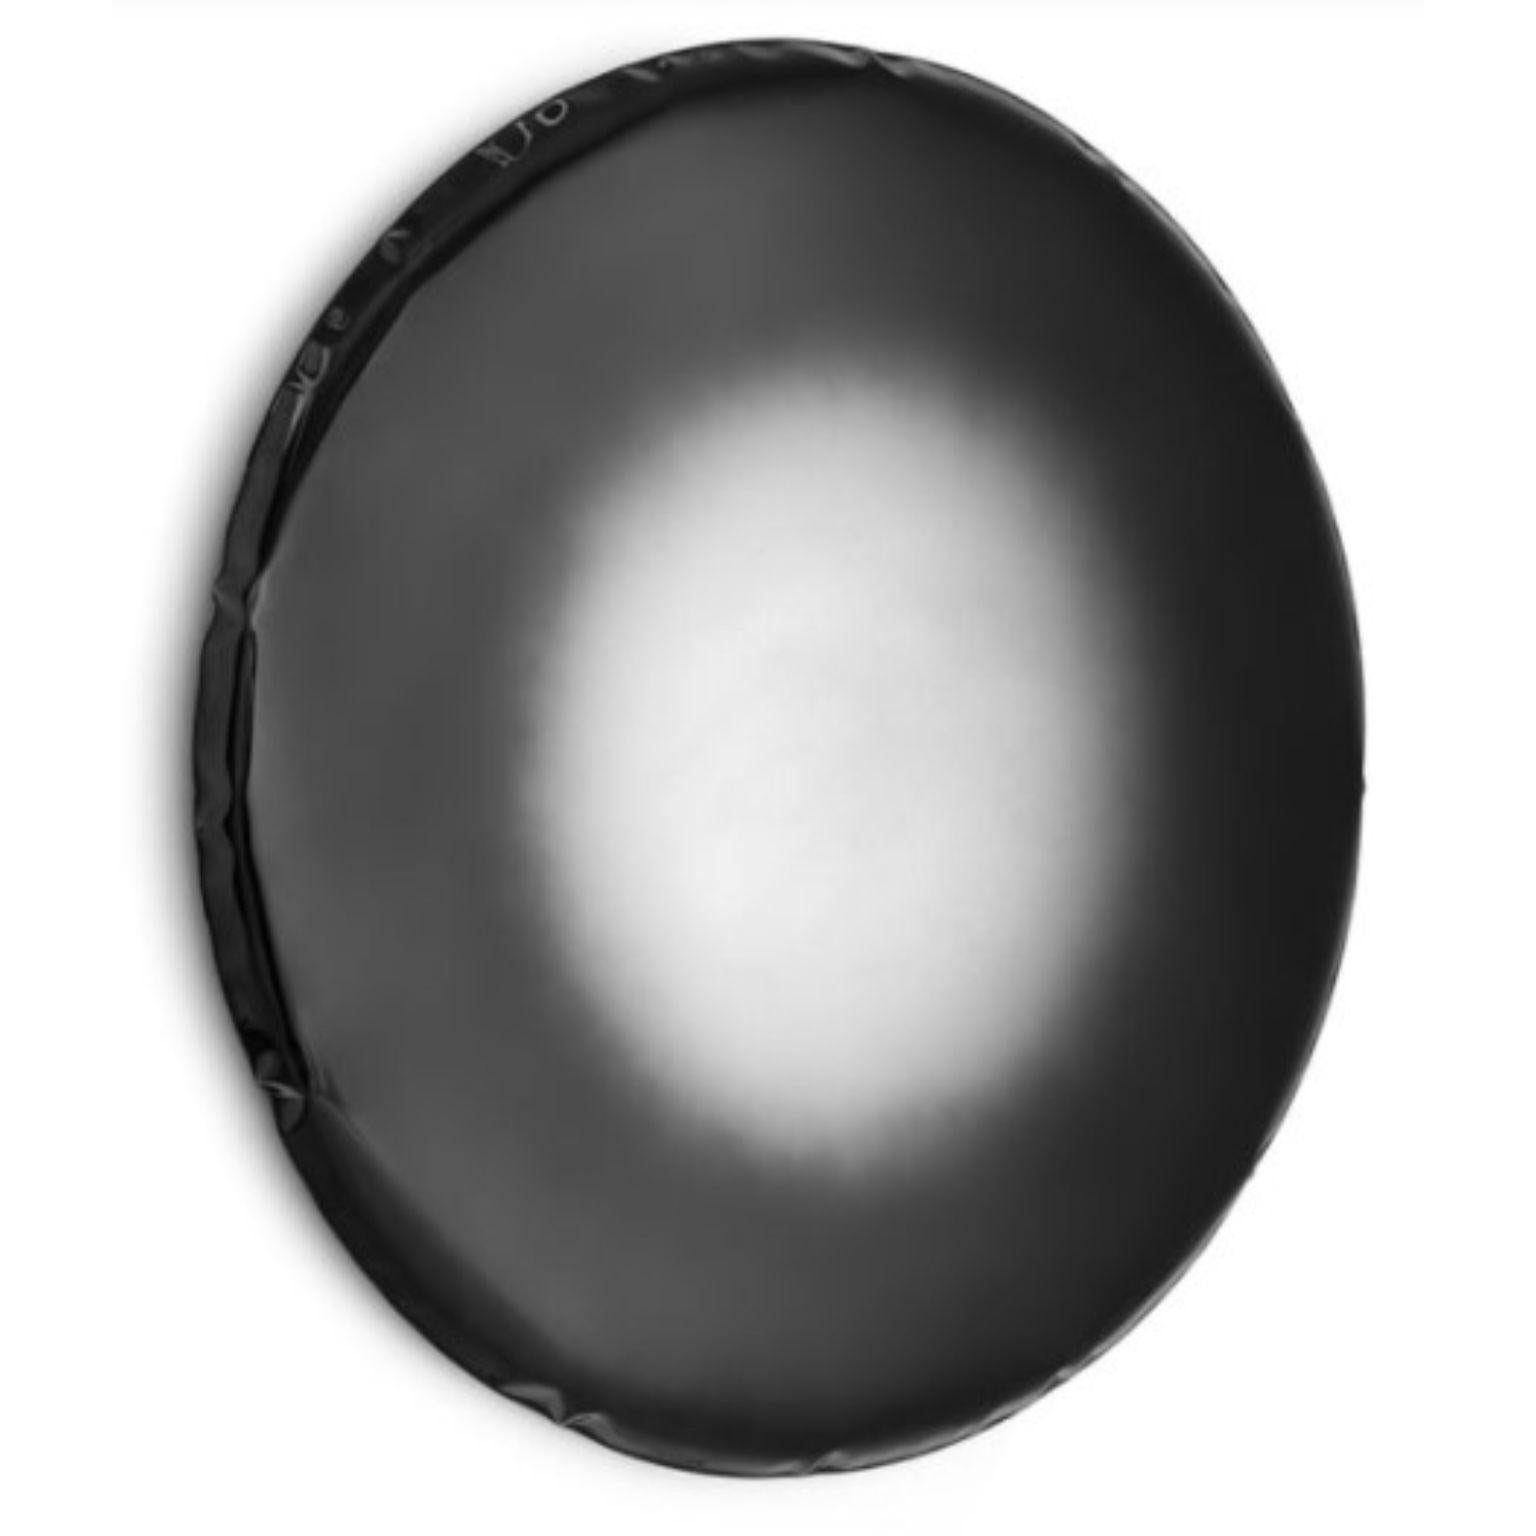 Dark Matter Oko 95 Sculptural Wall Mirror by Zieta
Dimensions: Diameter 95 x D 6 cm 
Material: Stainless steel. 
Finish: Dark Matter.
Available in finishes: Stainless Steel, Deep Space Blue, Emerald, Saphire, Saphire/Emerald, Dark Matter, and Red